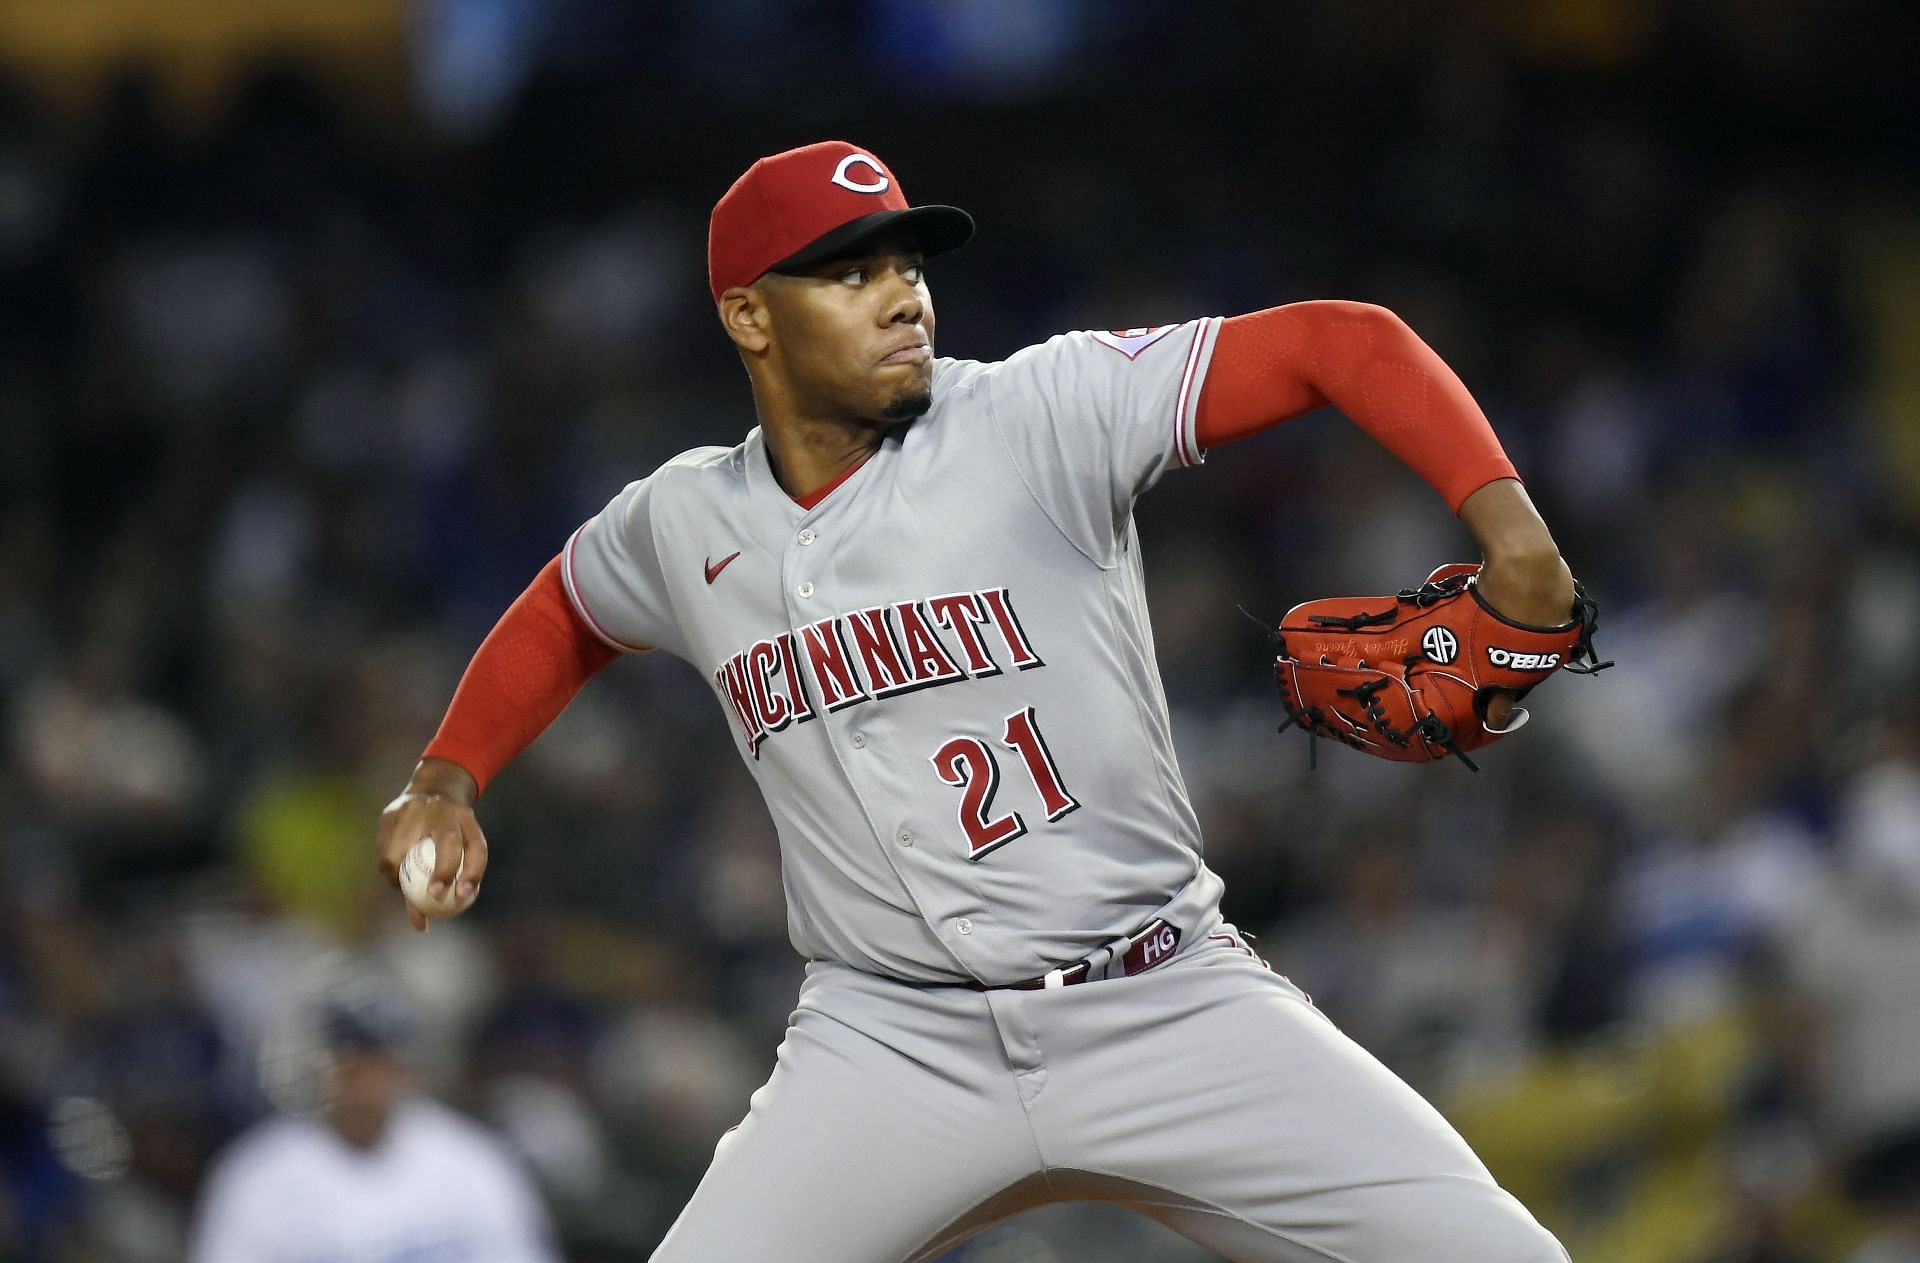 Cincinnati Reds starting pitcher Hunter Greene is a rookie sensation with loads of potential